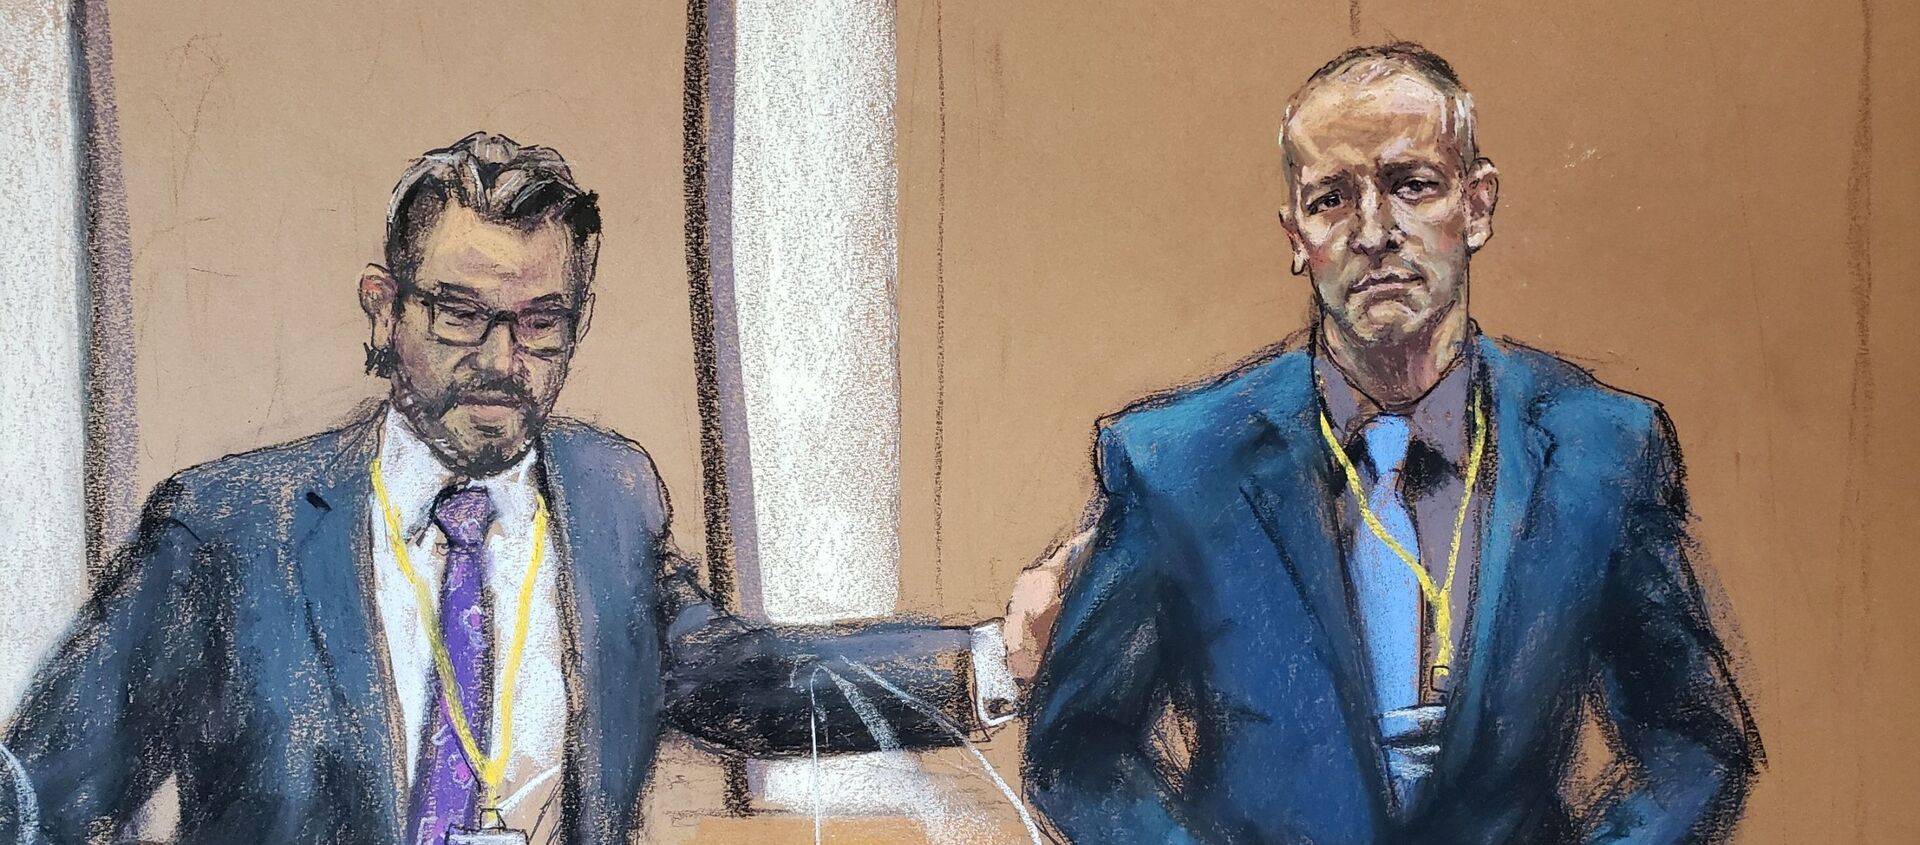 Defence attorney Eric Nelson introduces Derek Chauvin, the former Minneapolis police officer facing murder charges in the death of George Floyd, to potential jurors during jury selection in his trial in Minneapolis, Minnesota, U.S., March 15, 2021 in this courtroom sketch from a video feed of the proceedings. - Sputnik International, 1920, 19.04.2021